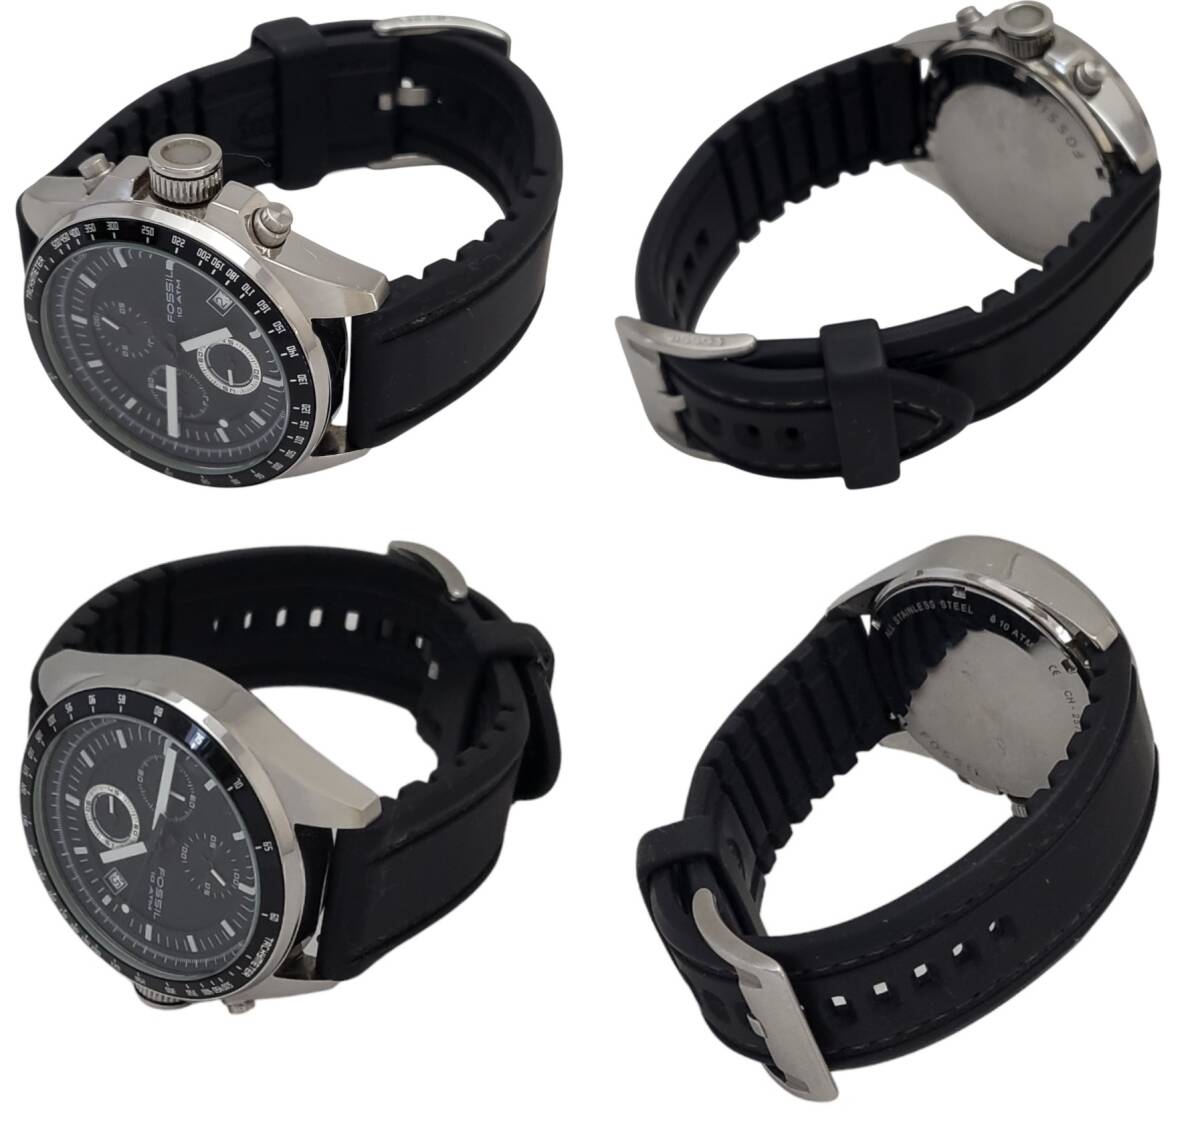 *FOSSIL 10 ATM/ Fossil wristwatch rubber belt analogue quarts chronograph men's gentleman thing face black color battery replaced operation goods 2573!!